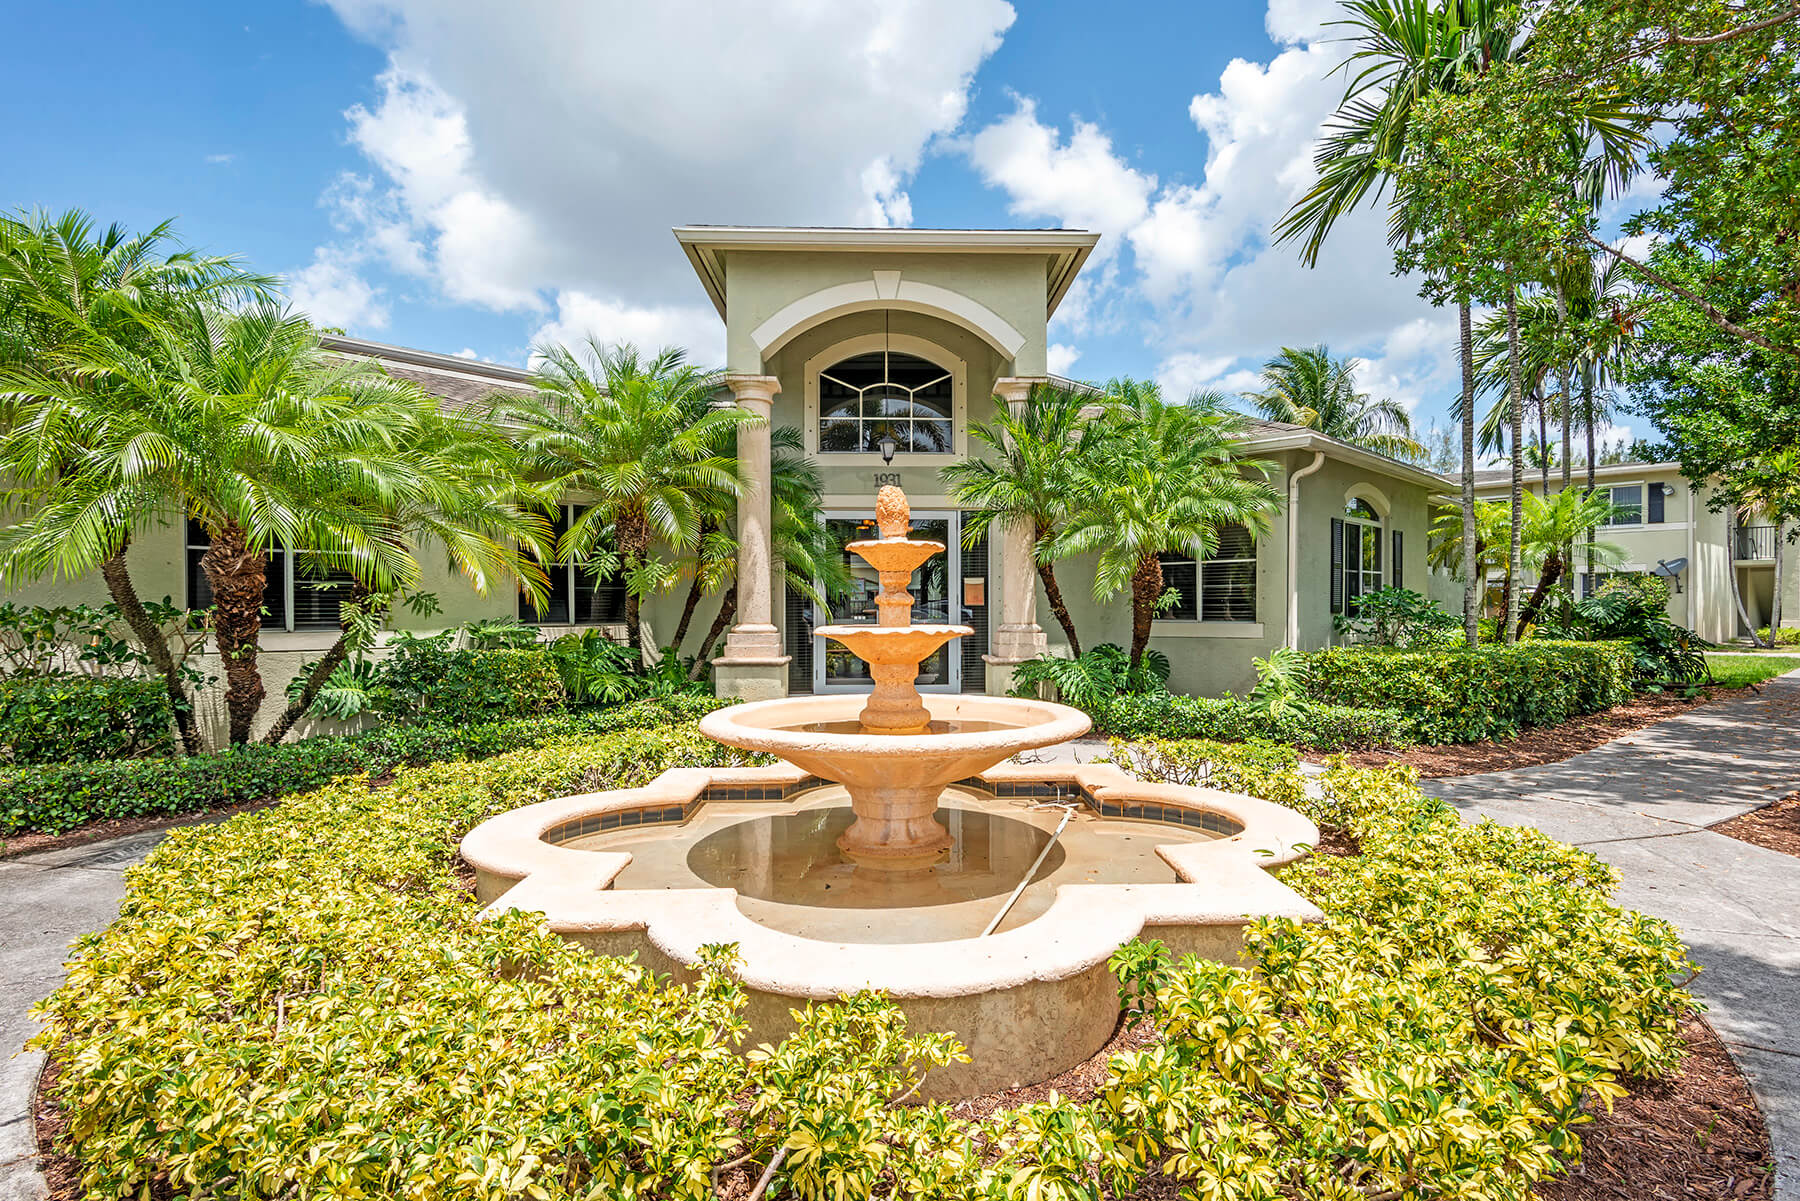 The building exterior and fountain sculpture of the leasing center at the Emerald Dunes Apartments in Miami, Florida.